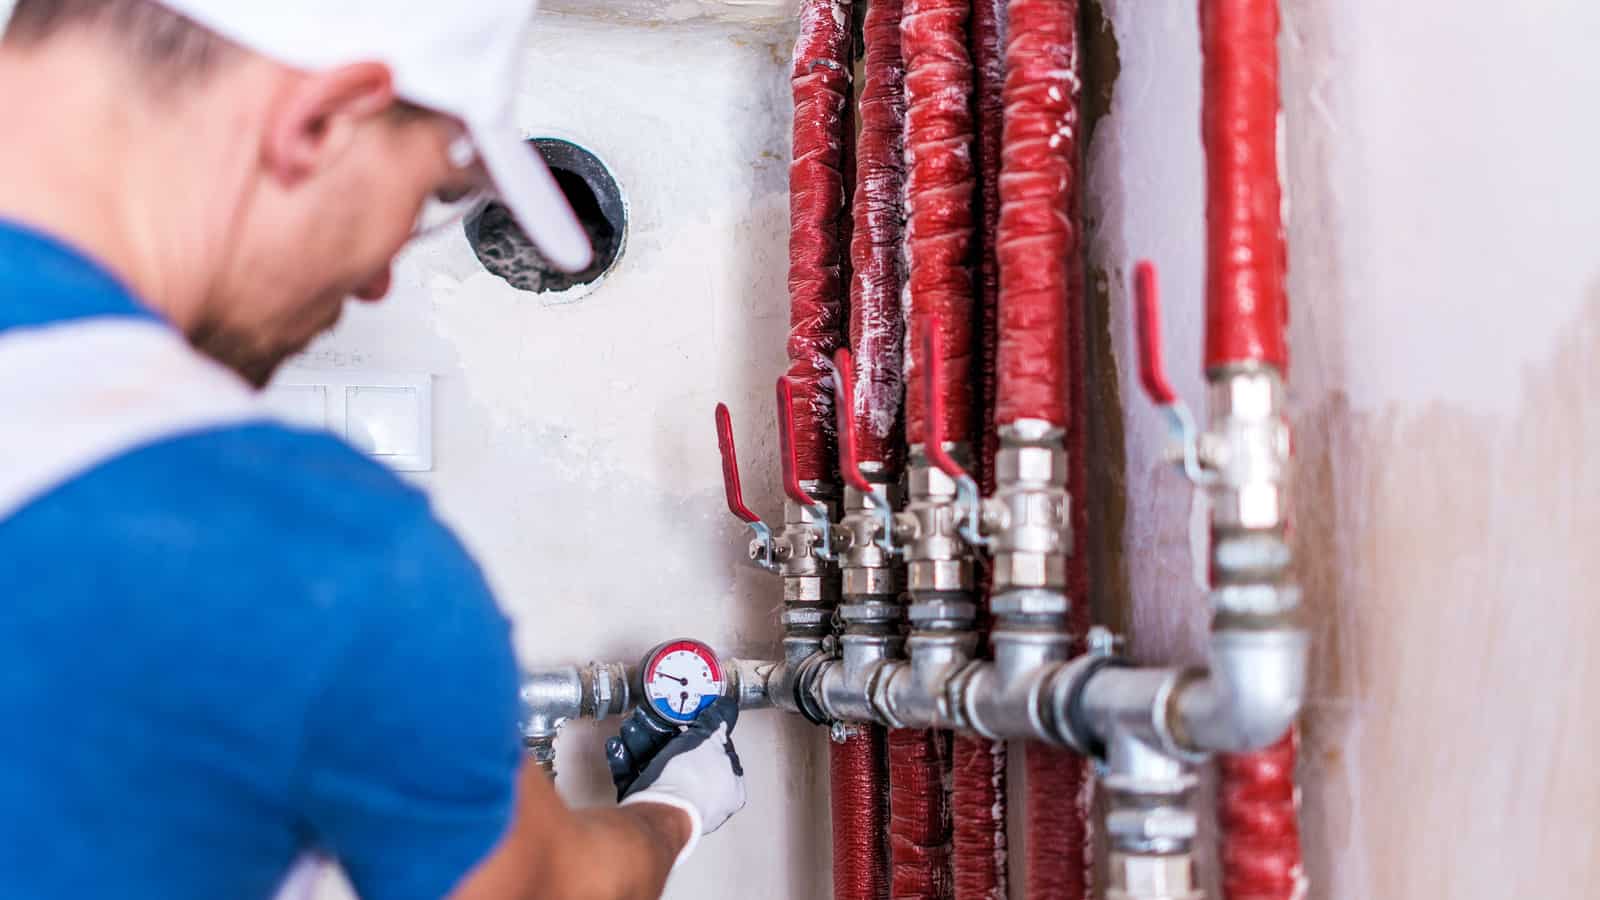 AMP Plumbing Services Inc of East Los Angeles